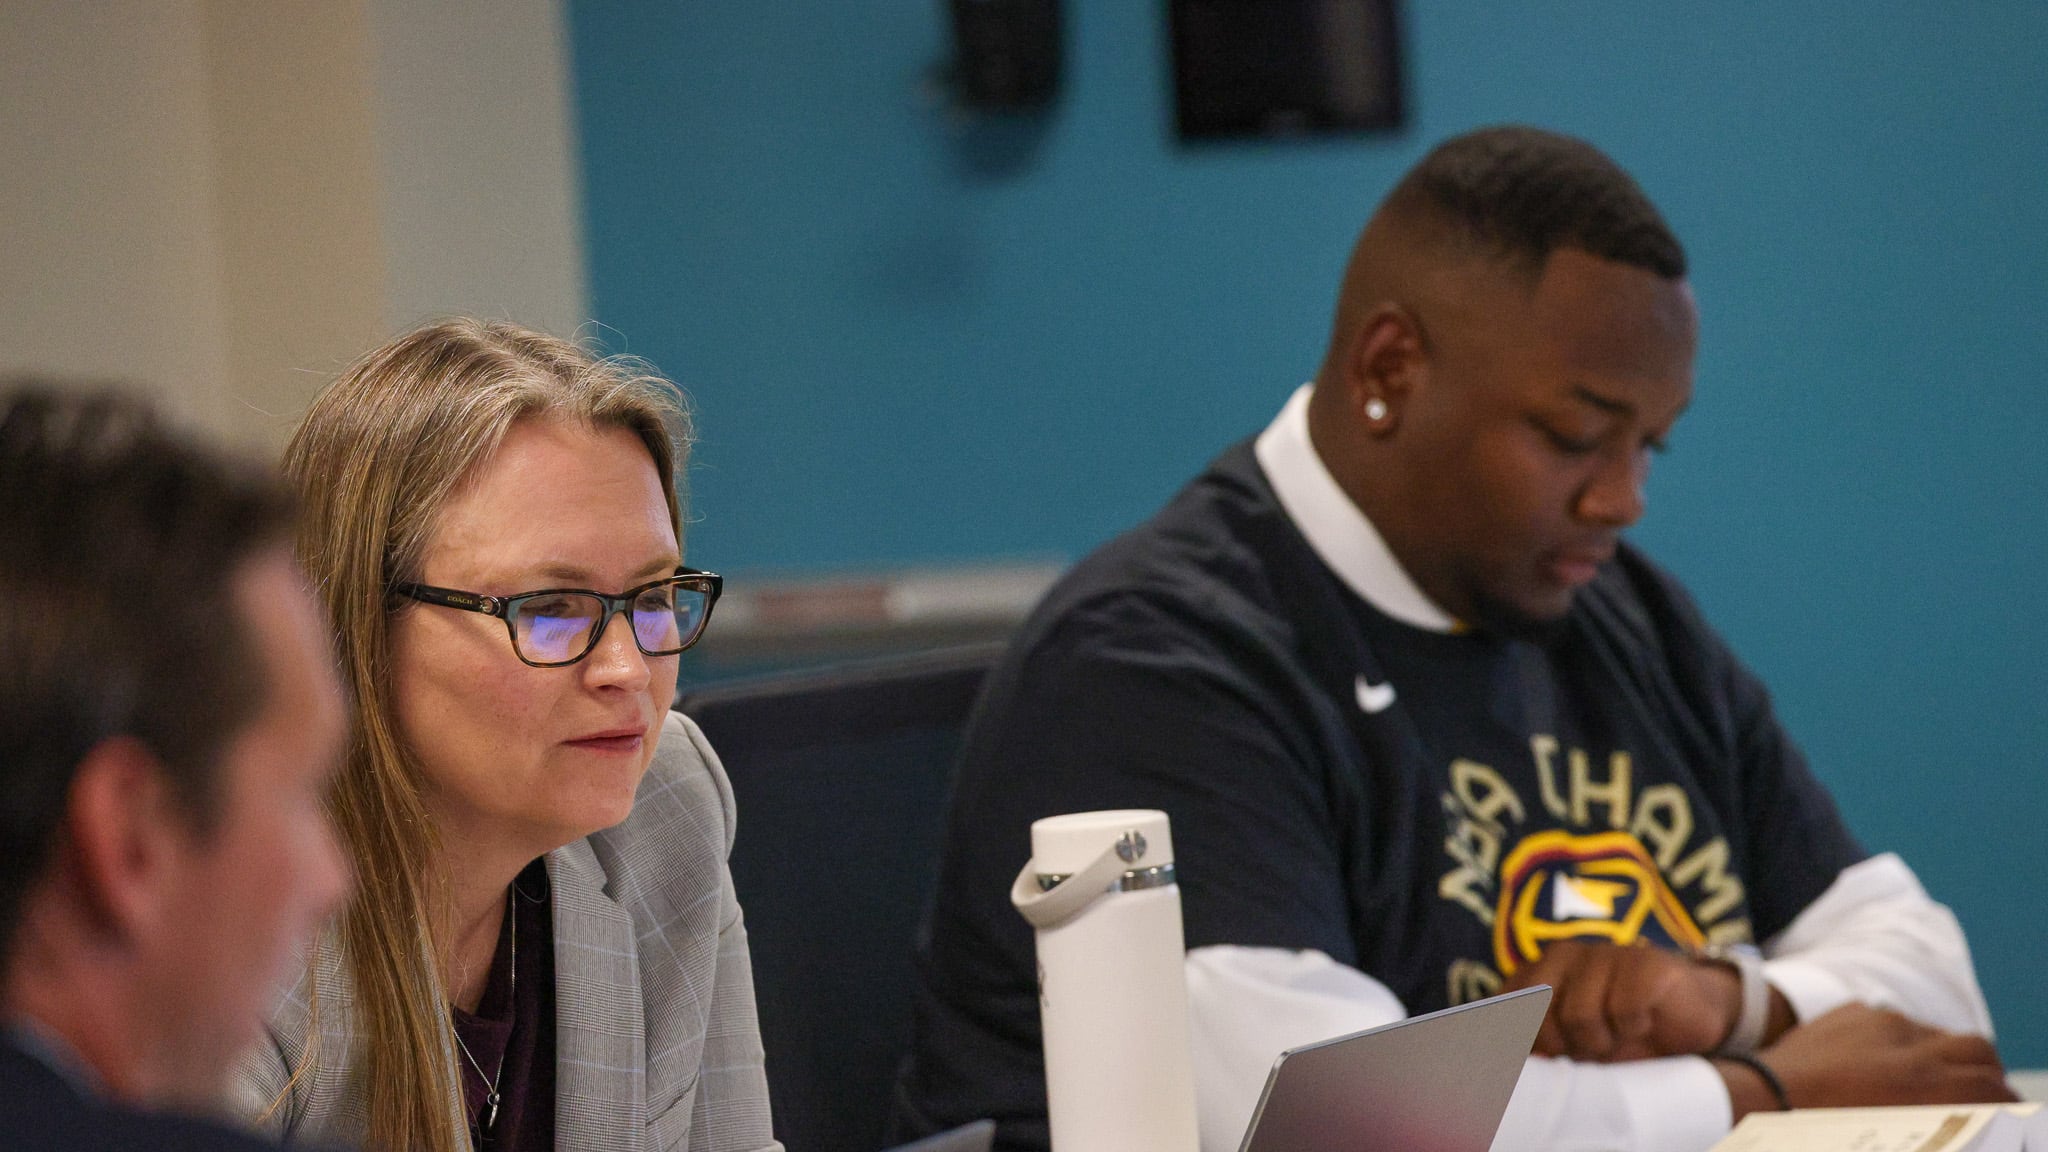 Denver school board members Carrie Olson, center, sits next to member Auon’tai Anderson at a table with laptops on them at school board meeting.